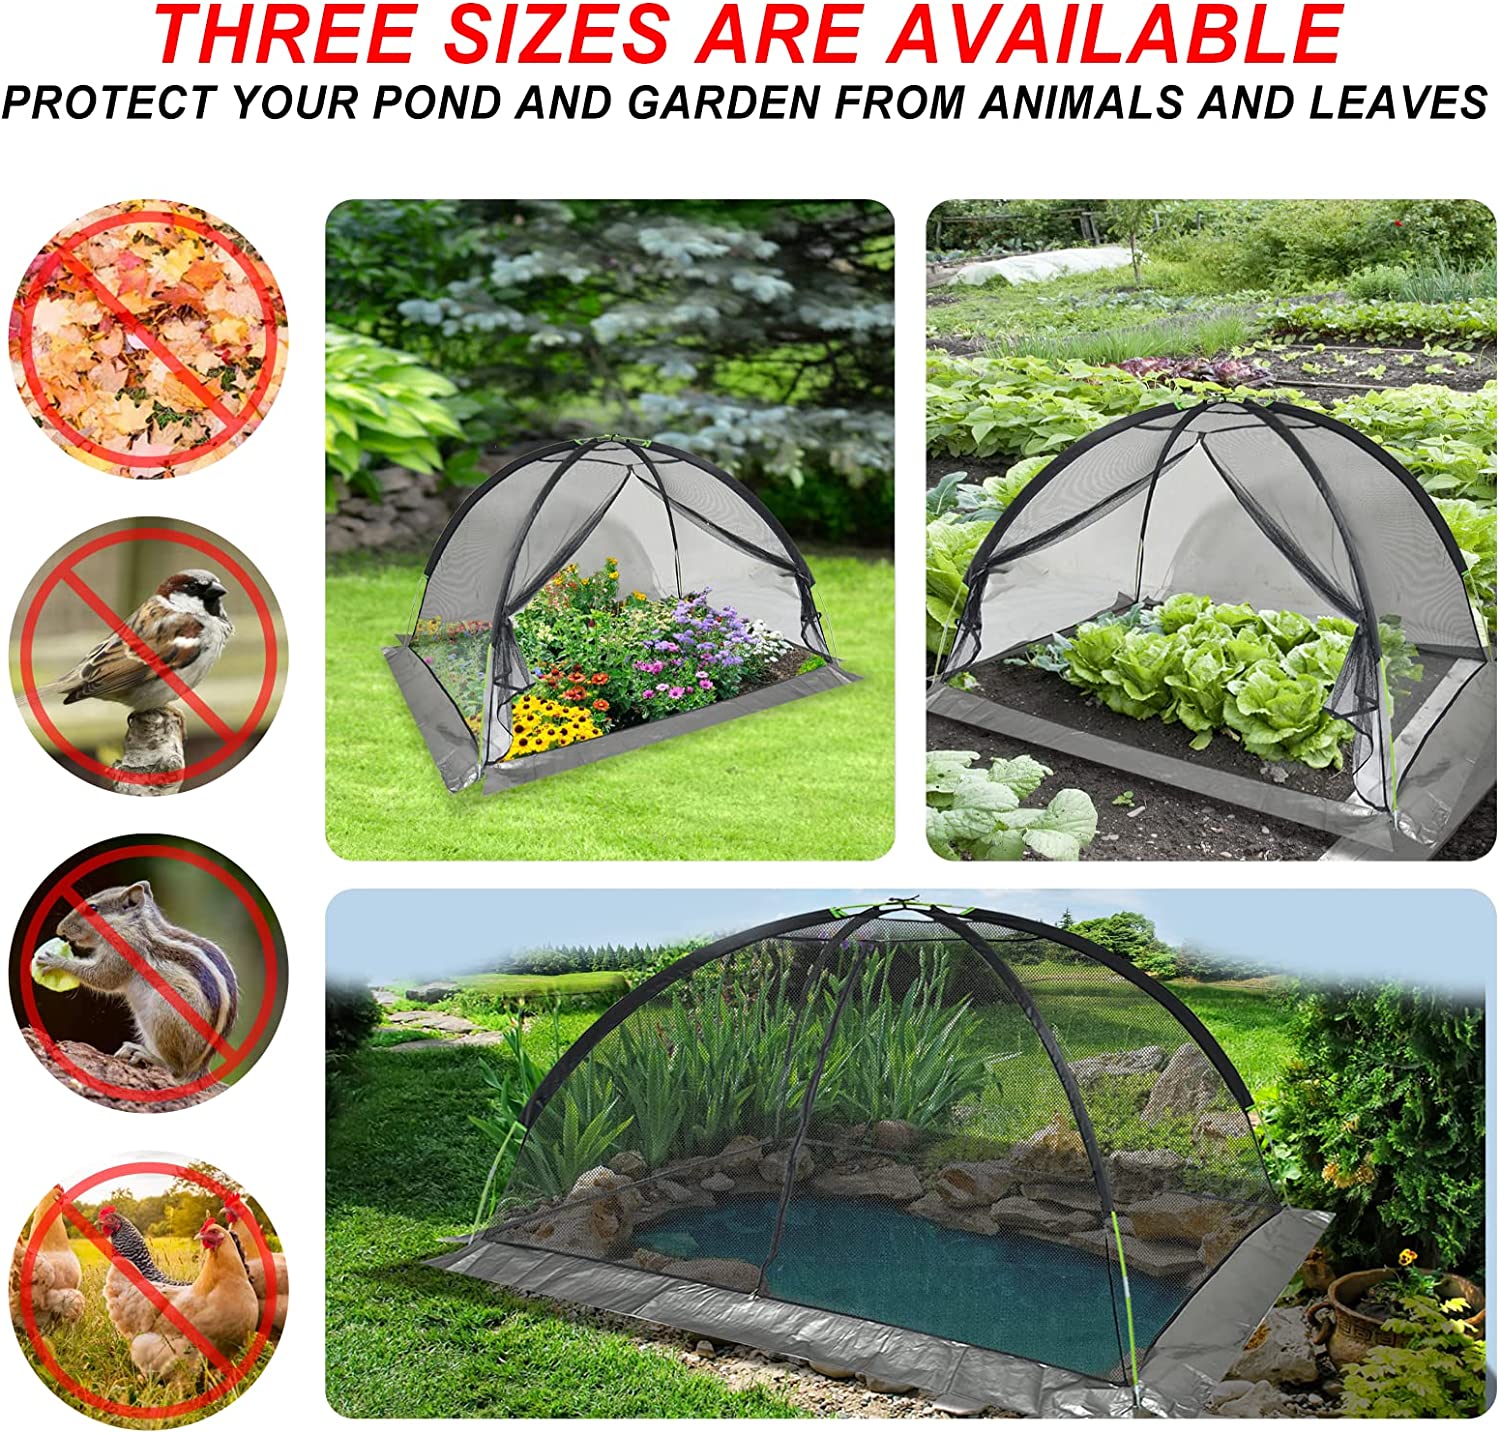 Pond Cover Garden Net - Pond Cover Dome, Garden Cover Net with Tent Ropes and Zippers, Nylon Pond Net Keeps Out Leaves, Animals, Debris for Garden Vegetable Plants Fields,Yard Pond 5X7 FT